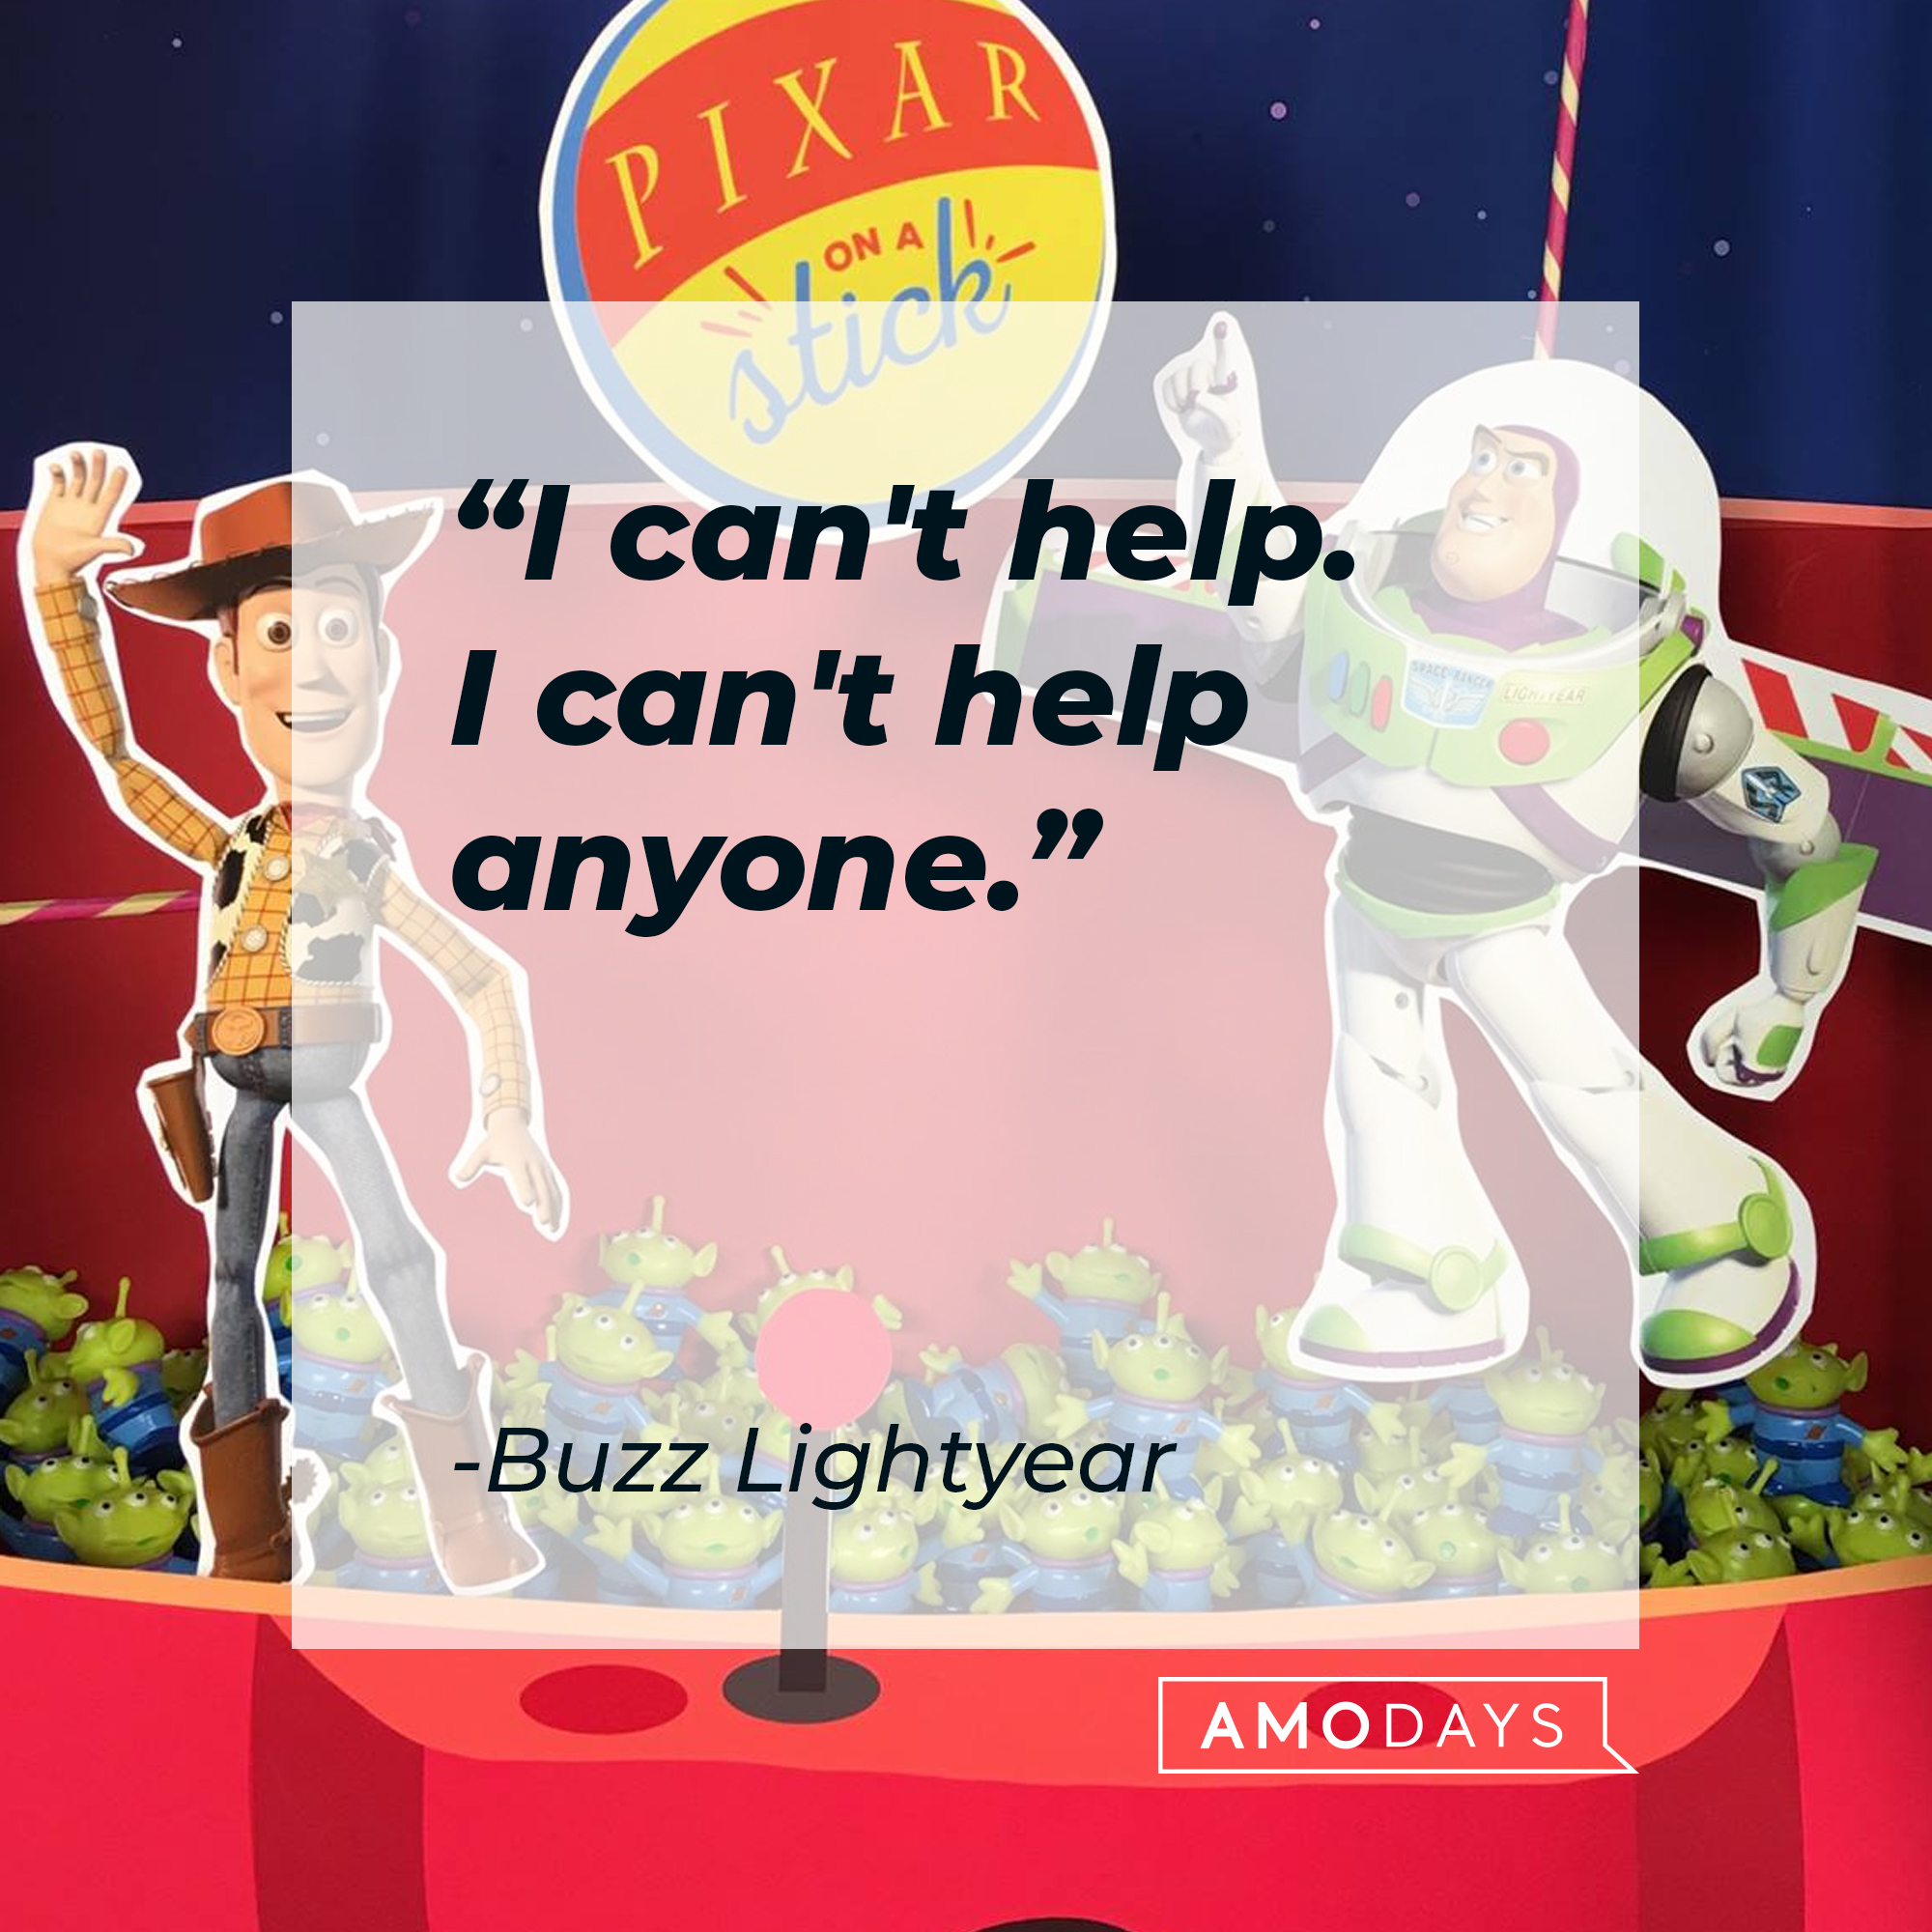 Buzz Lightyear's quote: "I can't help. I can't help anyone." | Source: Facebook/BuzzLightyear